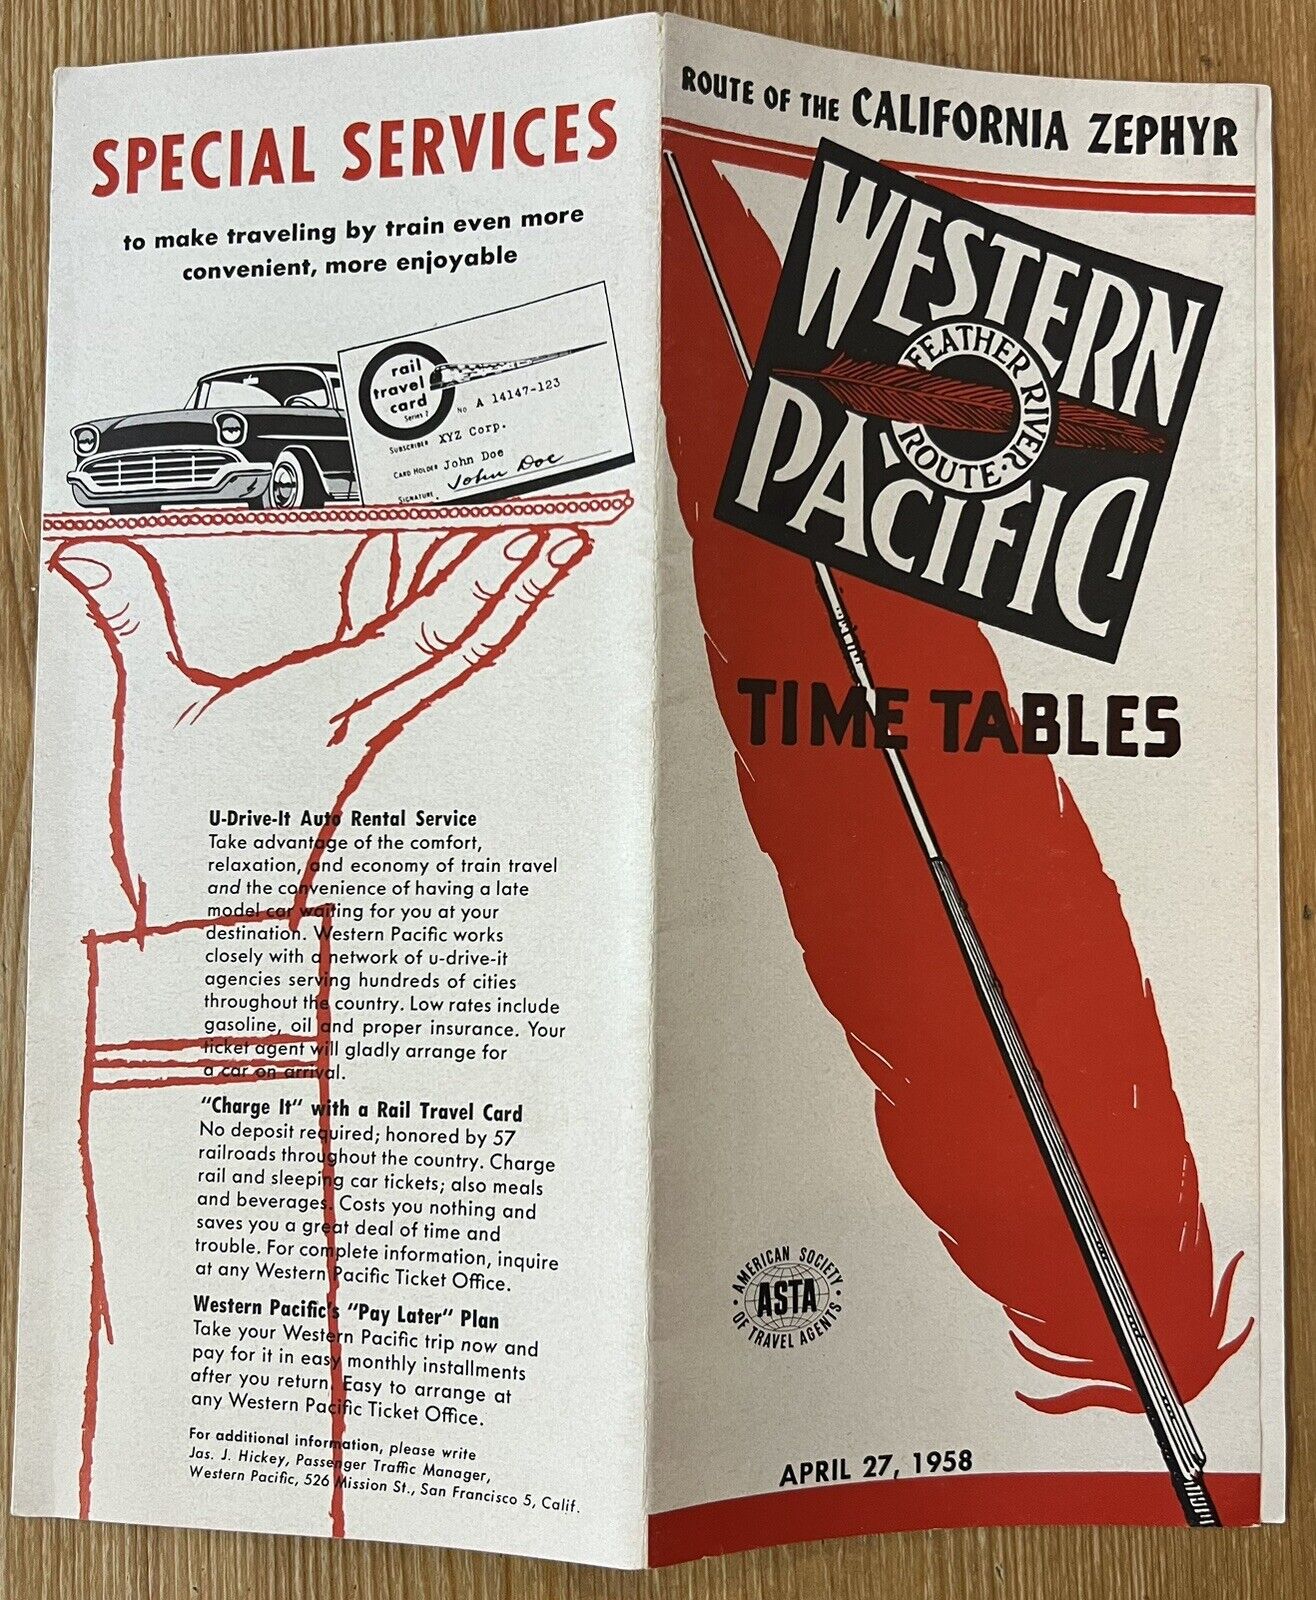 VTG 1958 Western Pacific Timetable Brochure CA Zephyr Feather River Route